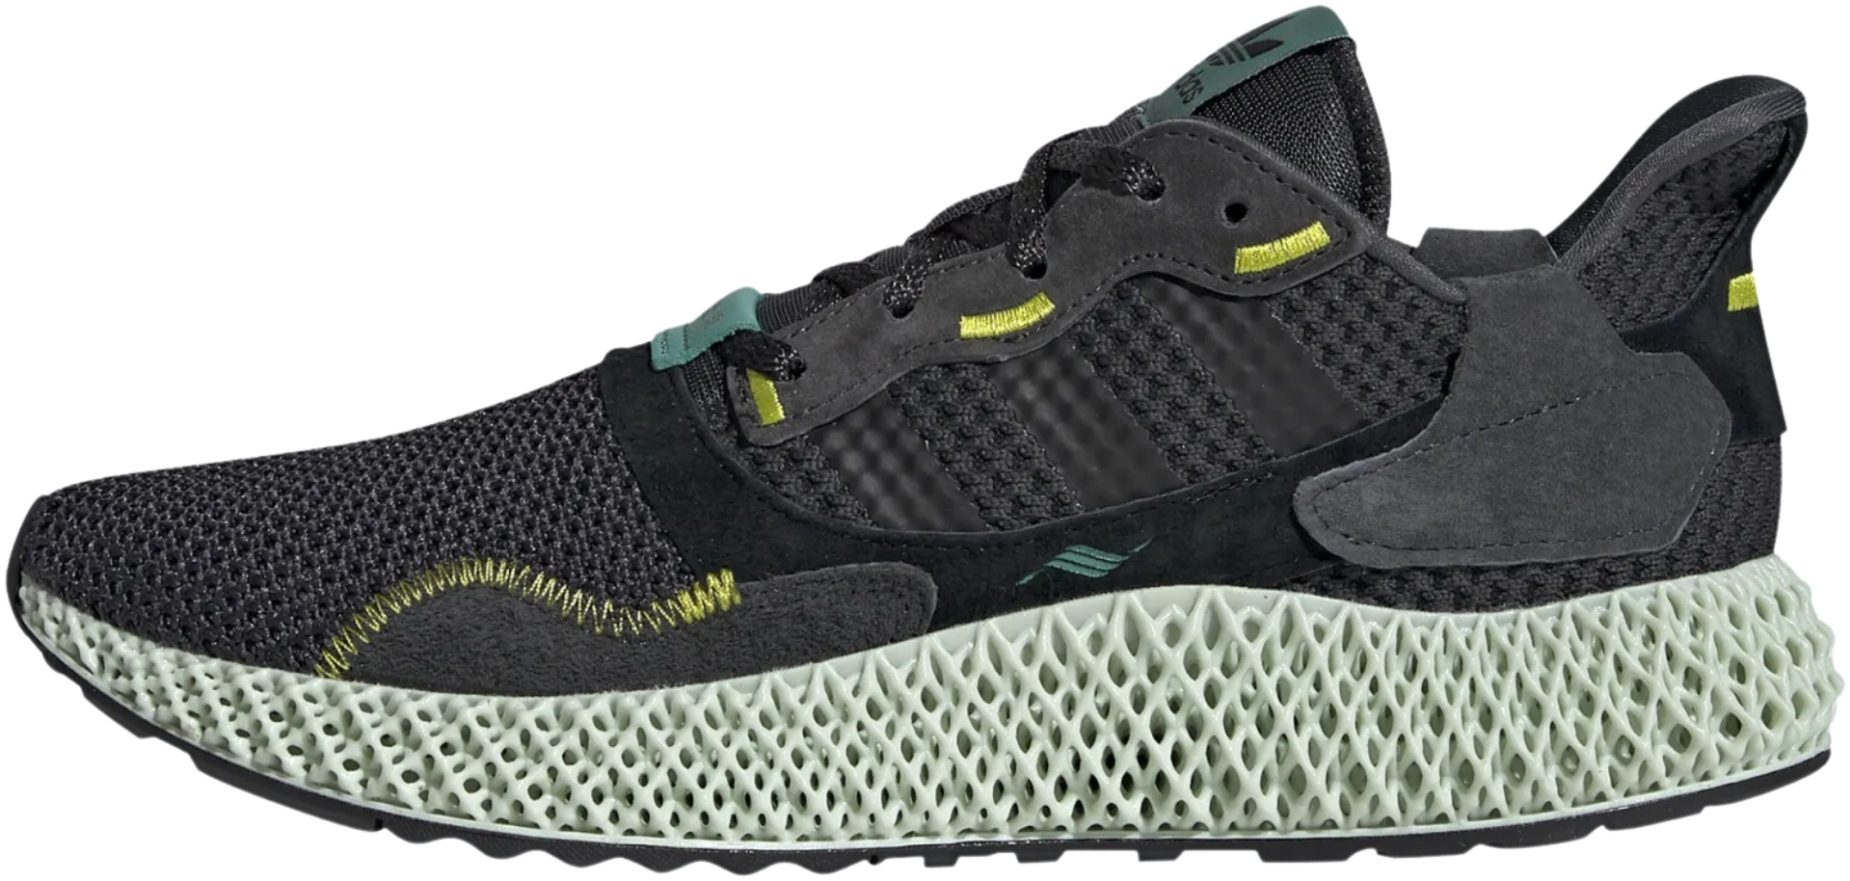 Adidas ZX 4D Review, Facts, Comparison | RunRepeat